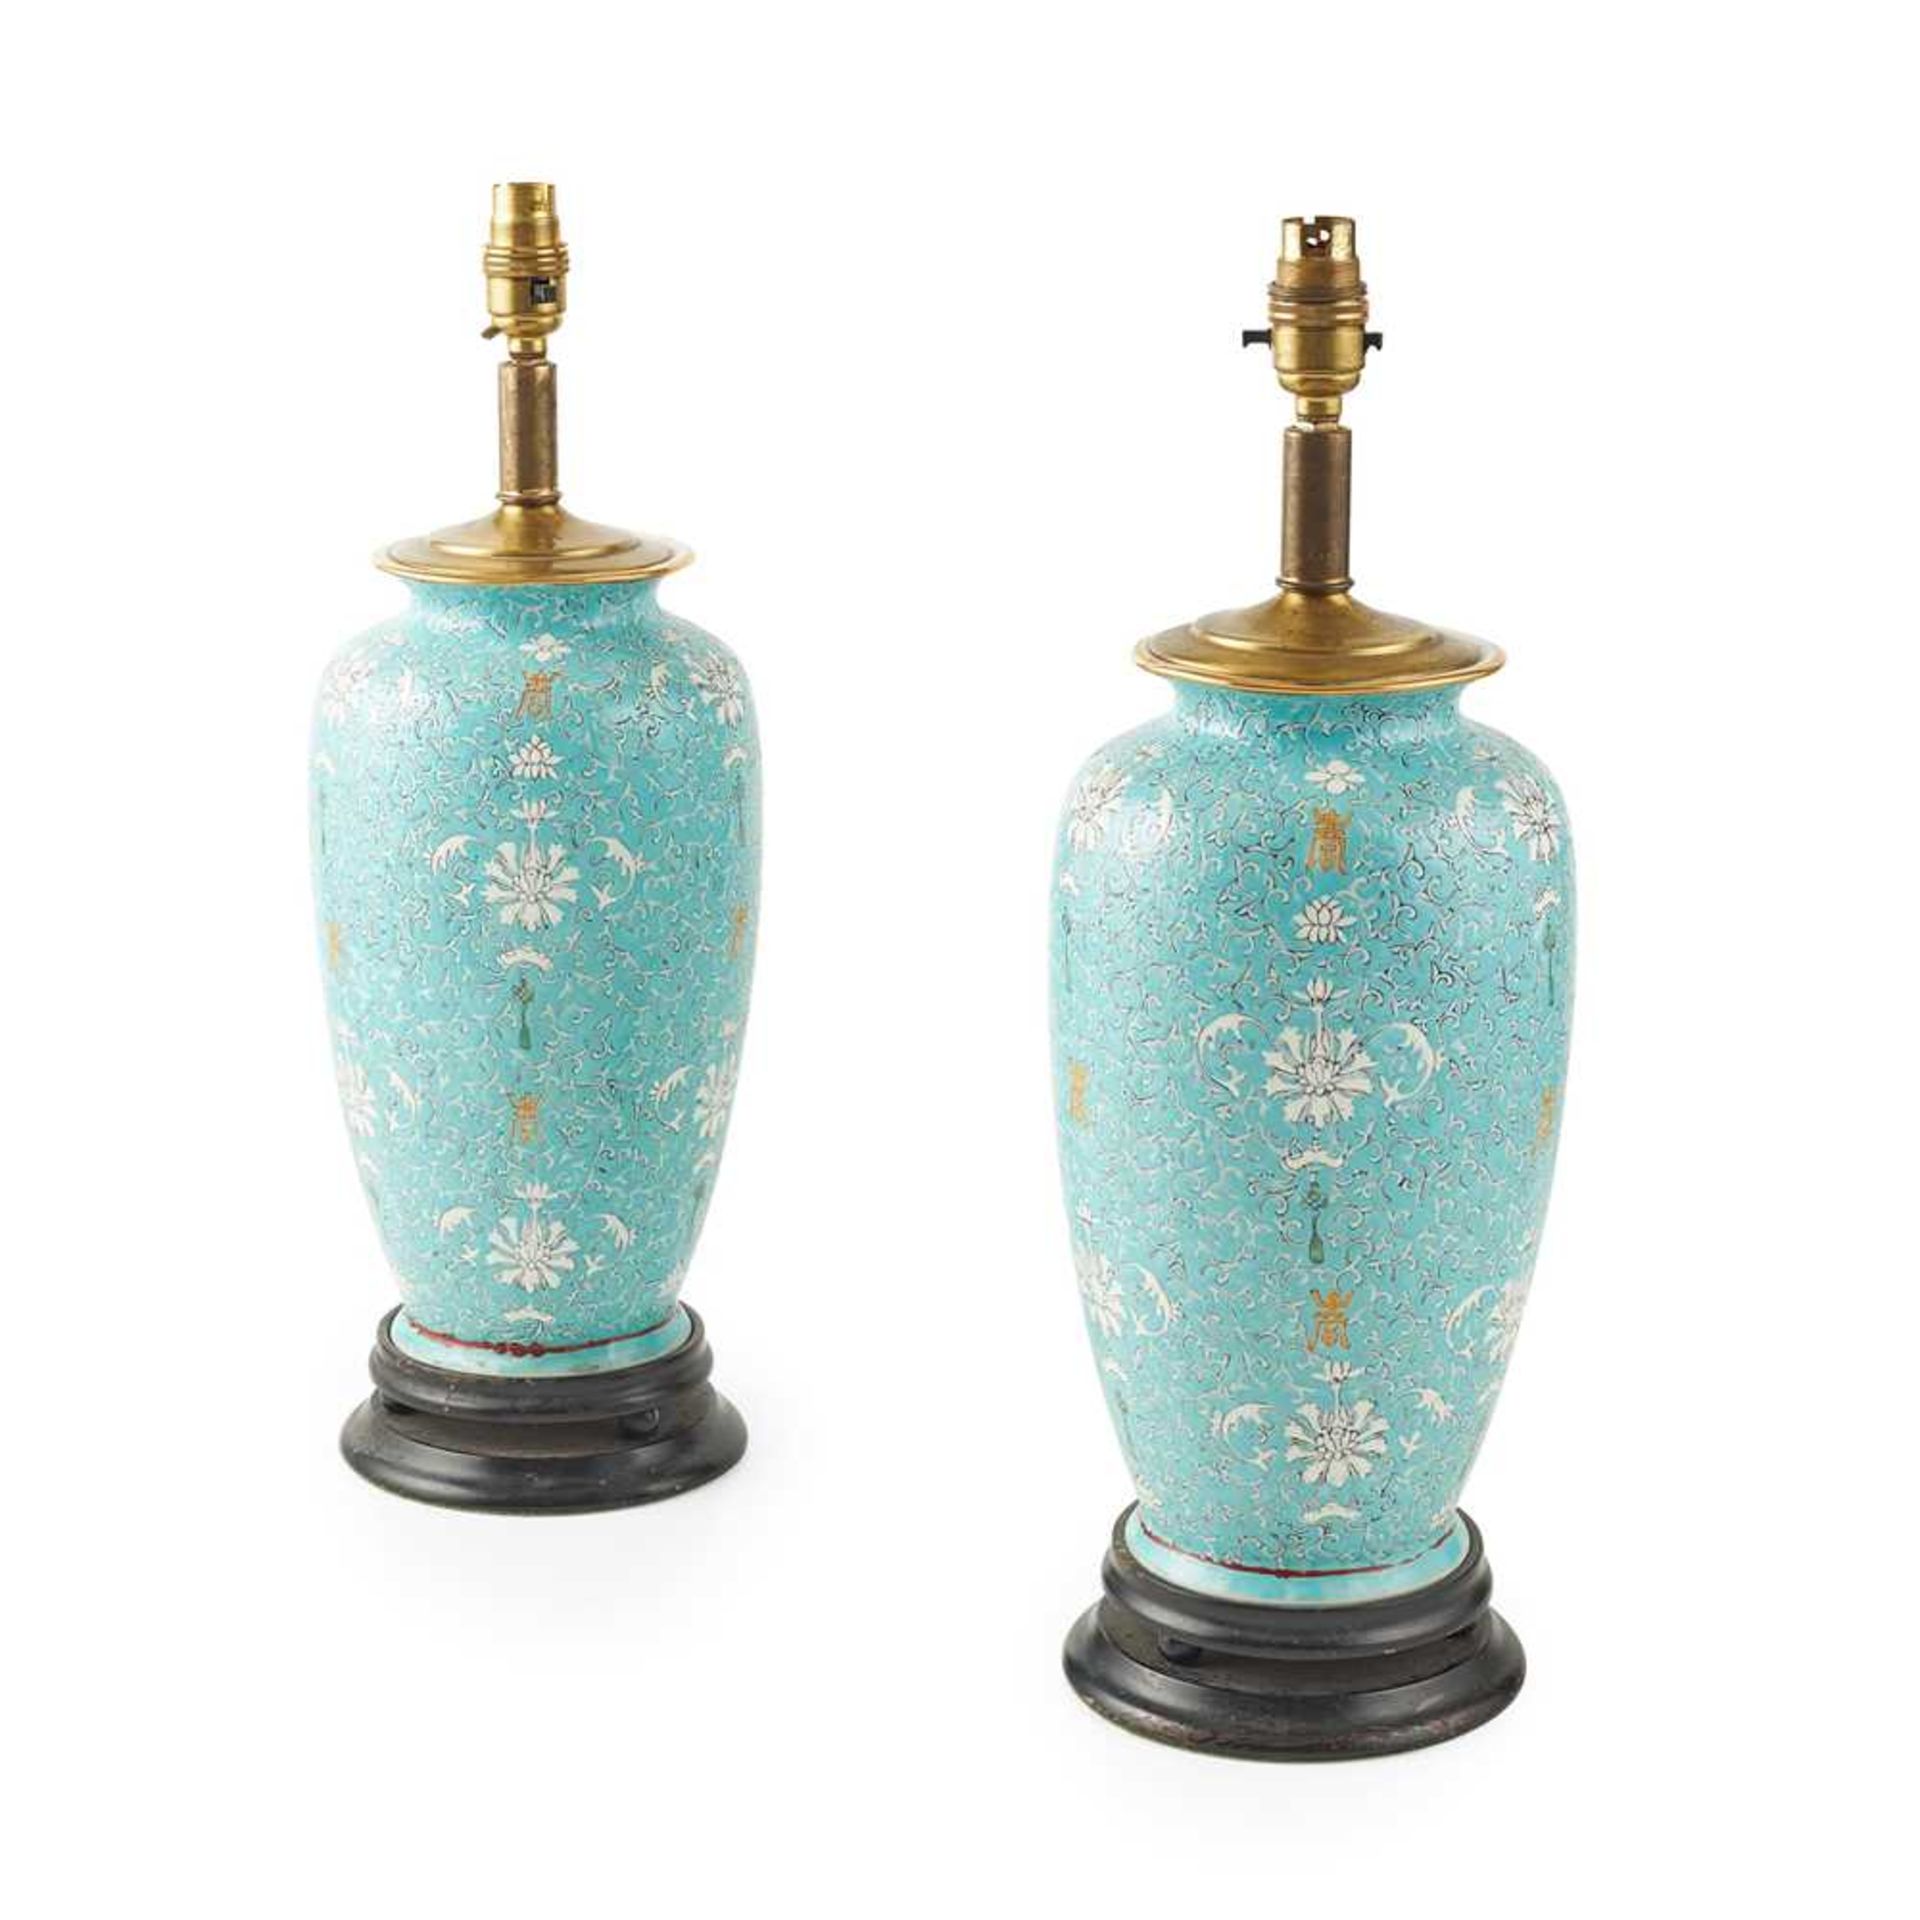 PAIR OF CHINESE TURQUOISE GROUND PORCELAIN VASES LATE QING/ REPUBLIC PERIOD